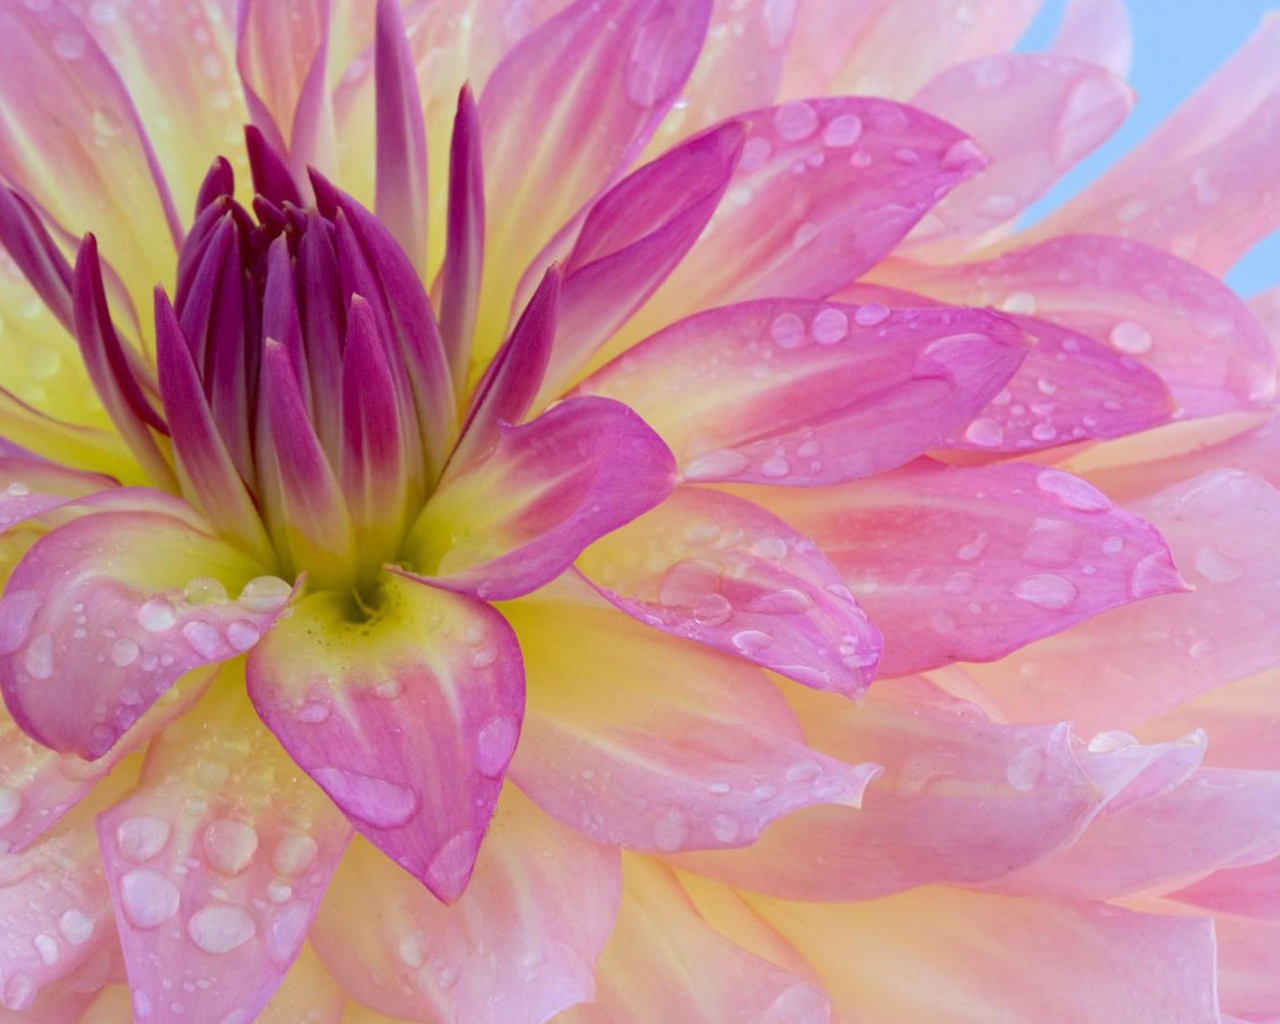 Pink dahlia with water droplets on petals close-up